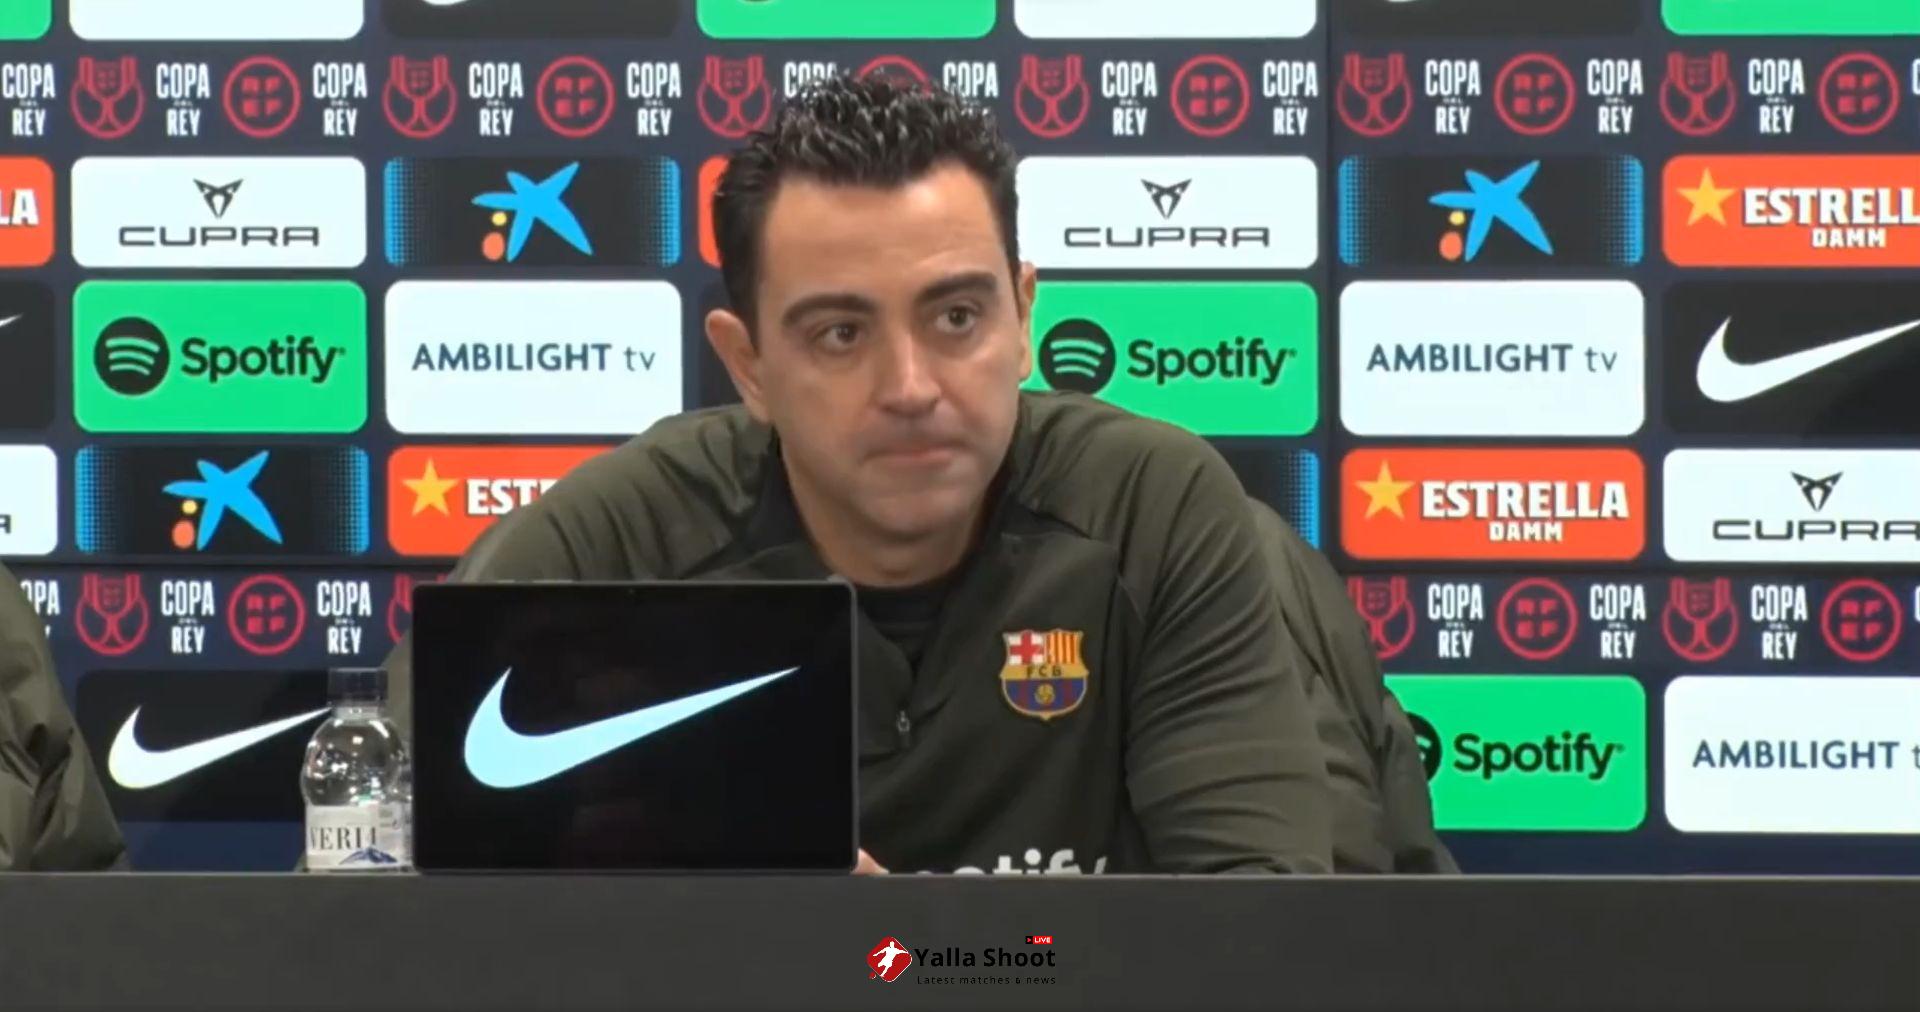 Xavi Hernandez compares Barcelona star's injury woes to "a stab in the heart" - "He is the soul of the team"